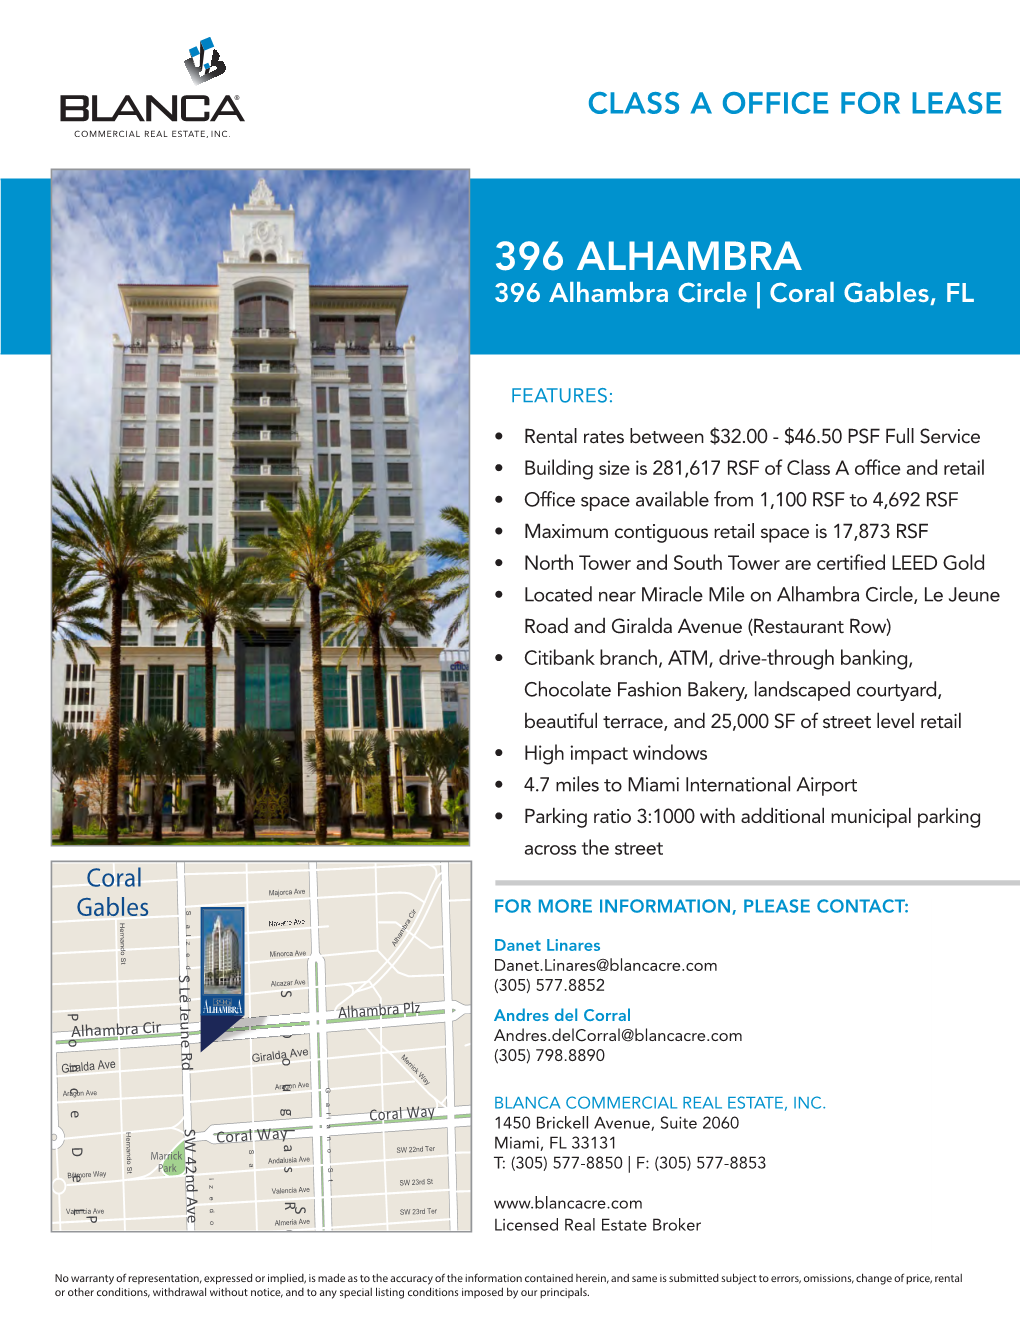 396 Alhambra Circle | Coral Gables, FL 396 ALHAMBRA 396 Alhambra Circle – Coral Gables,FEATURES: Florida • Rental Rates Between $32.00 - $46.50 PSF Full Service